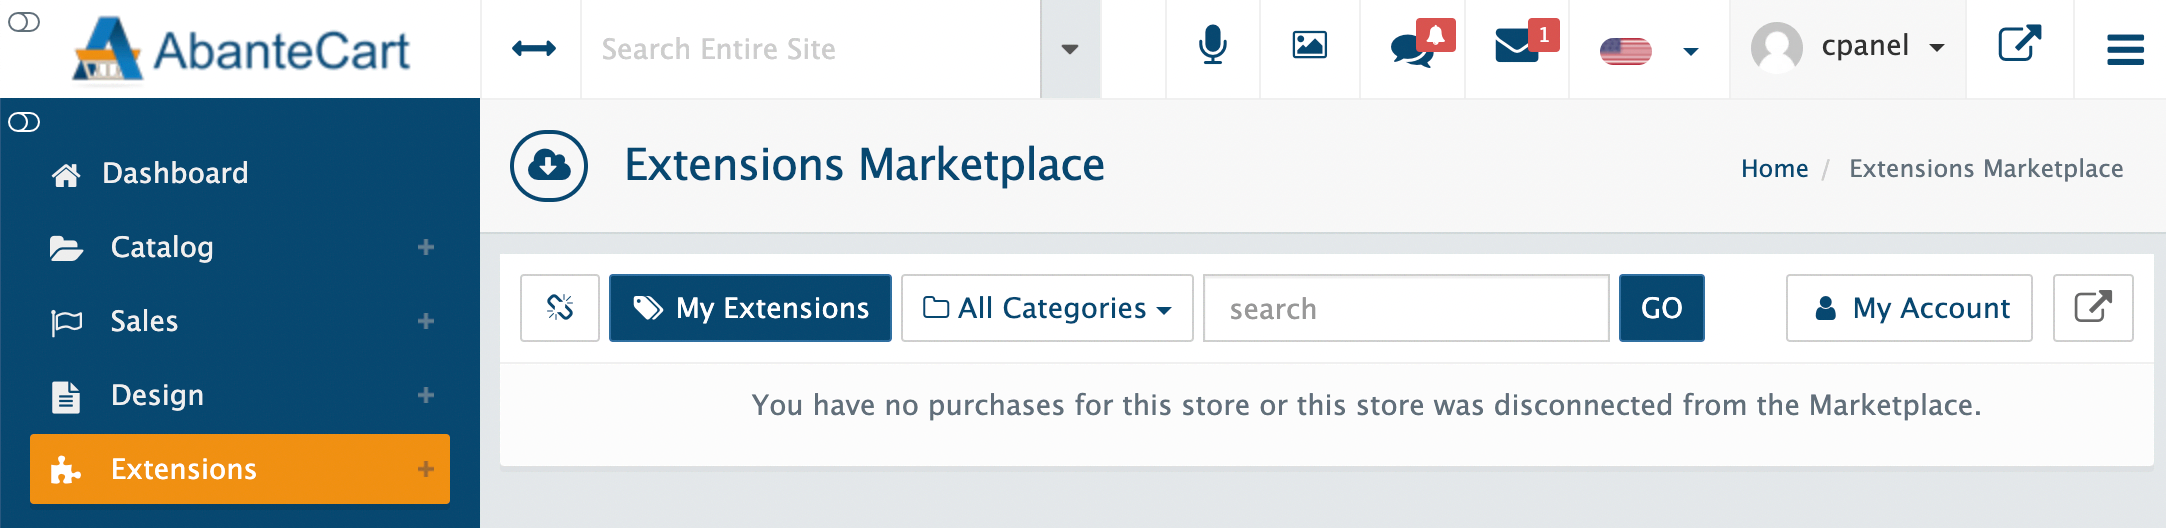 You have no purchases for this store or this store was disconnected from the Marketplace.